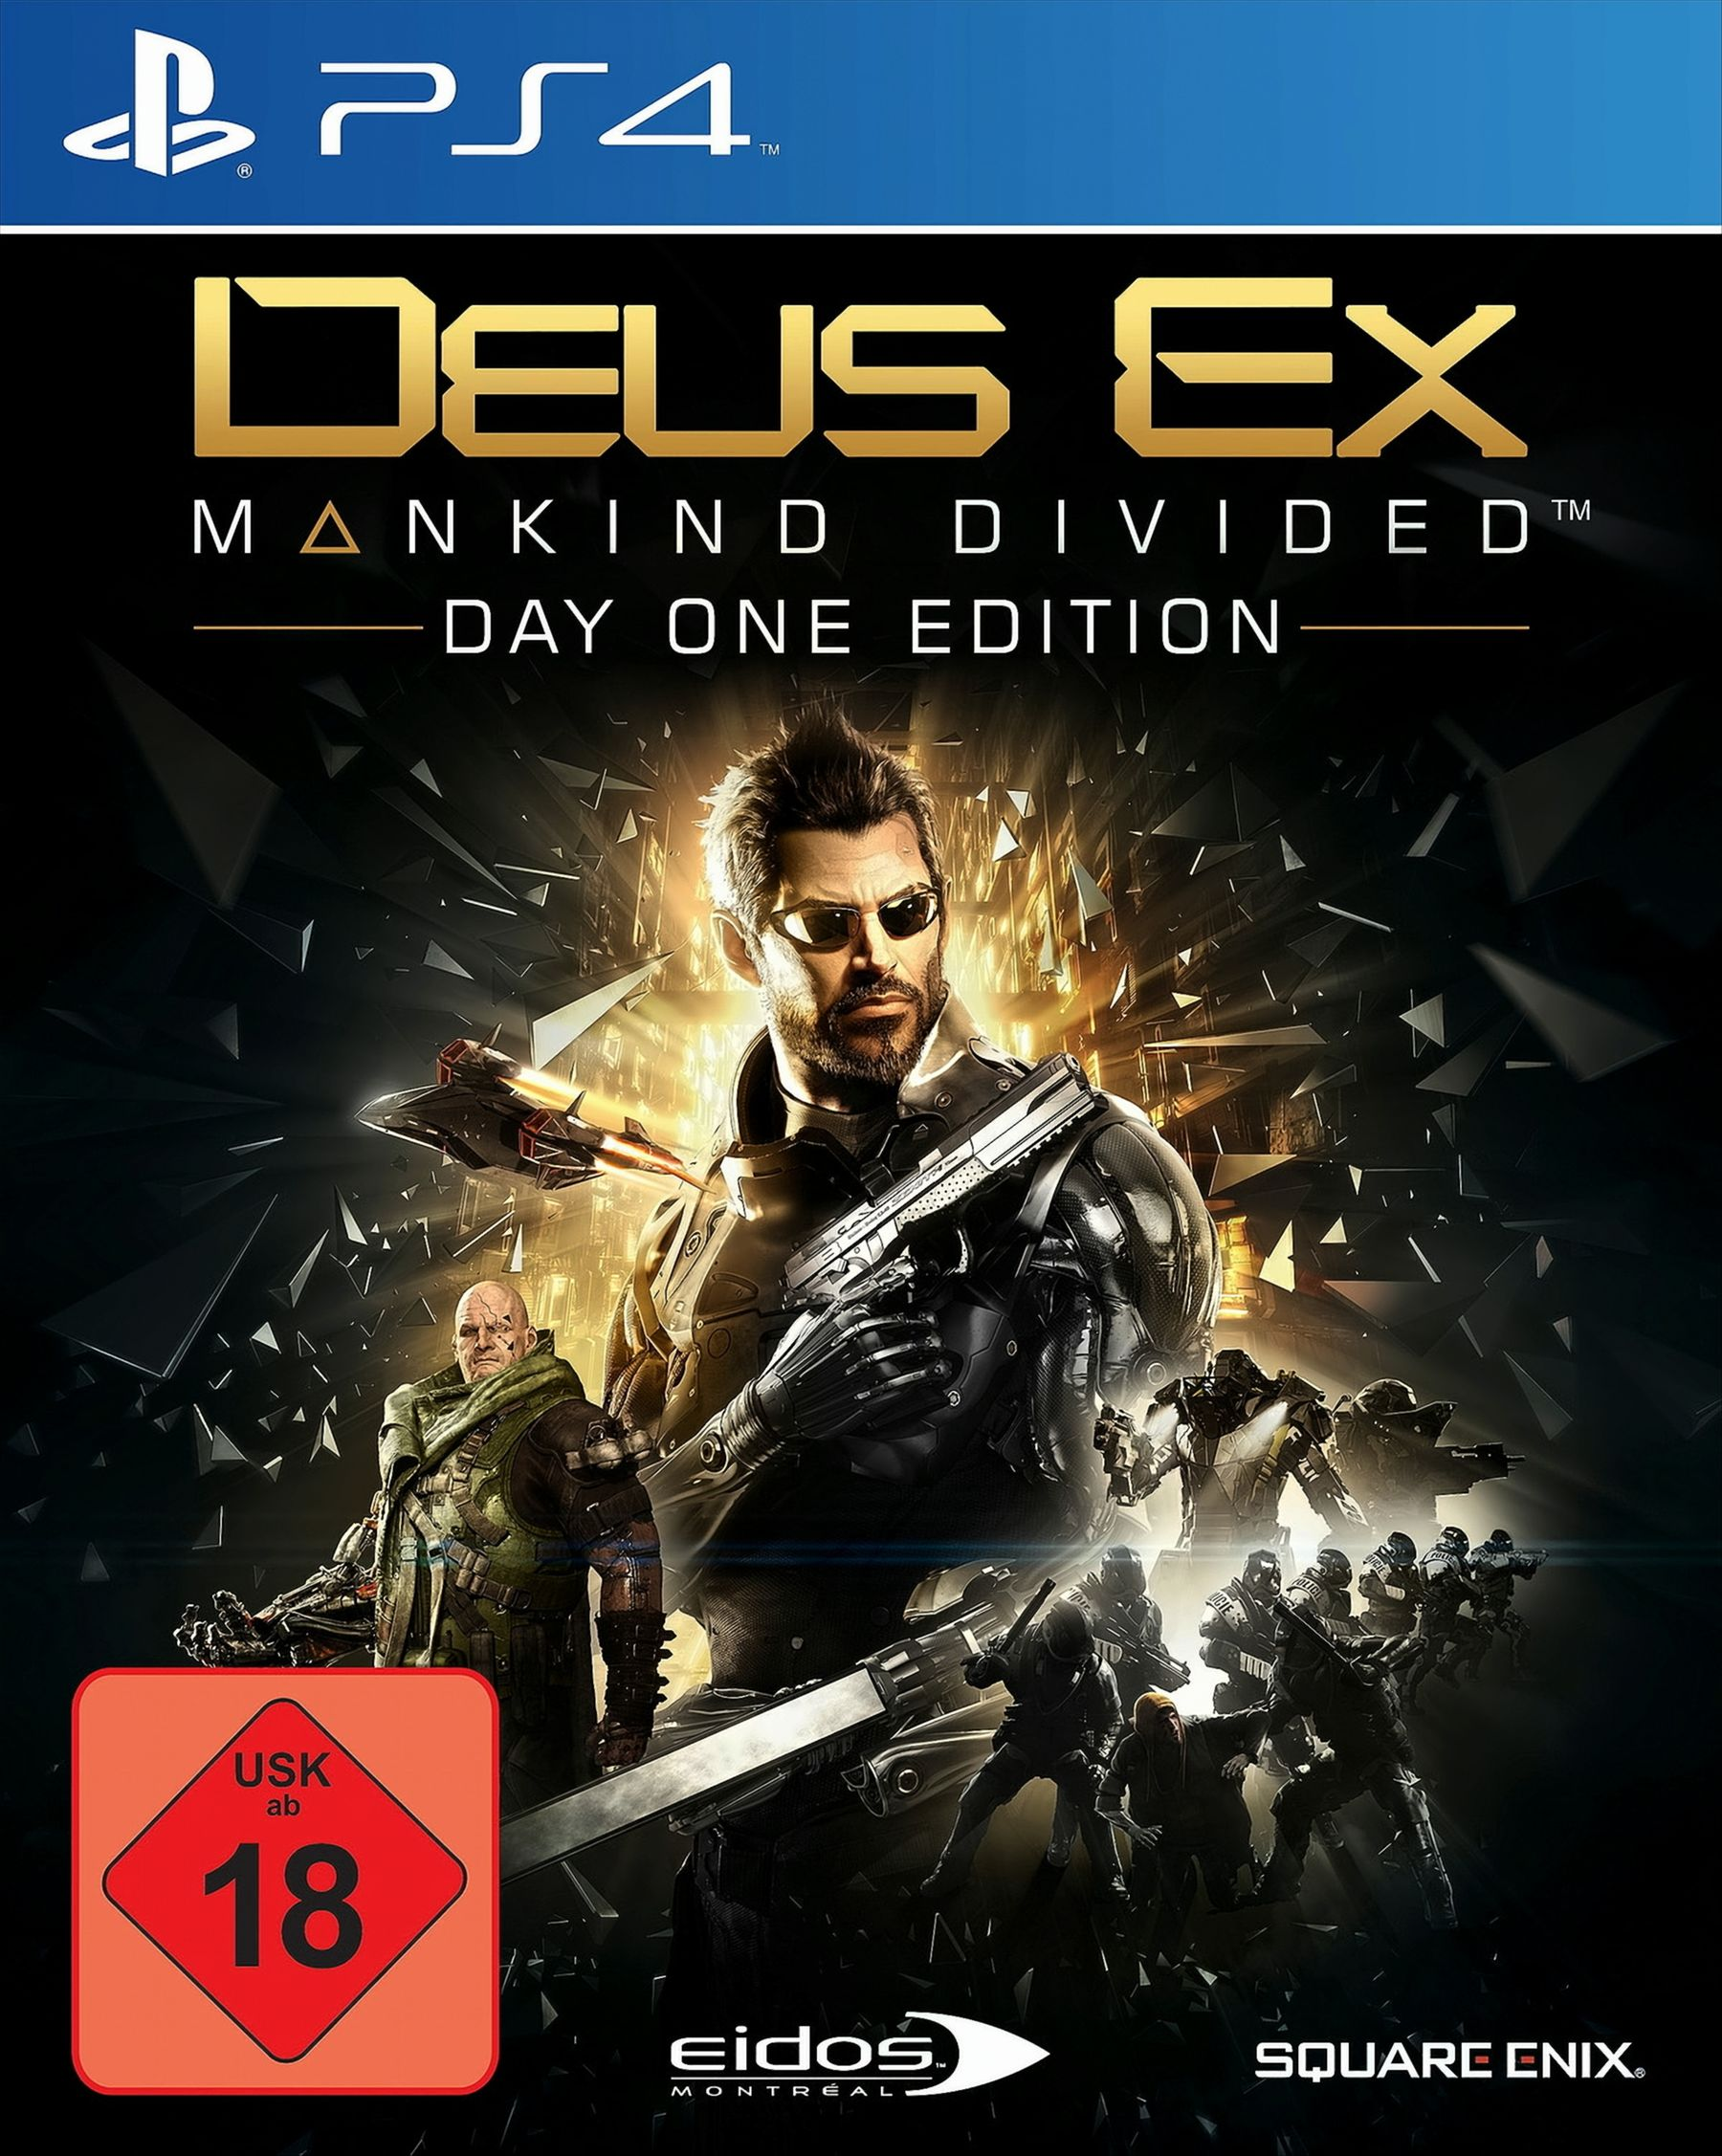 [PlayStation - Deus Mankind One - 4] Ex: Divided Day Edition